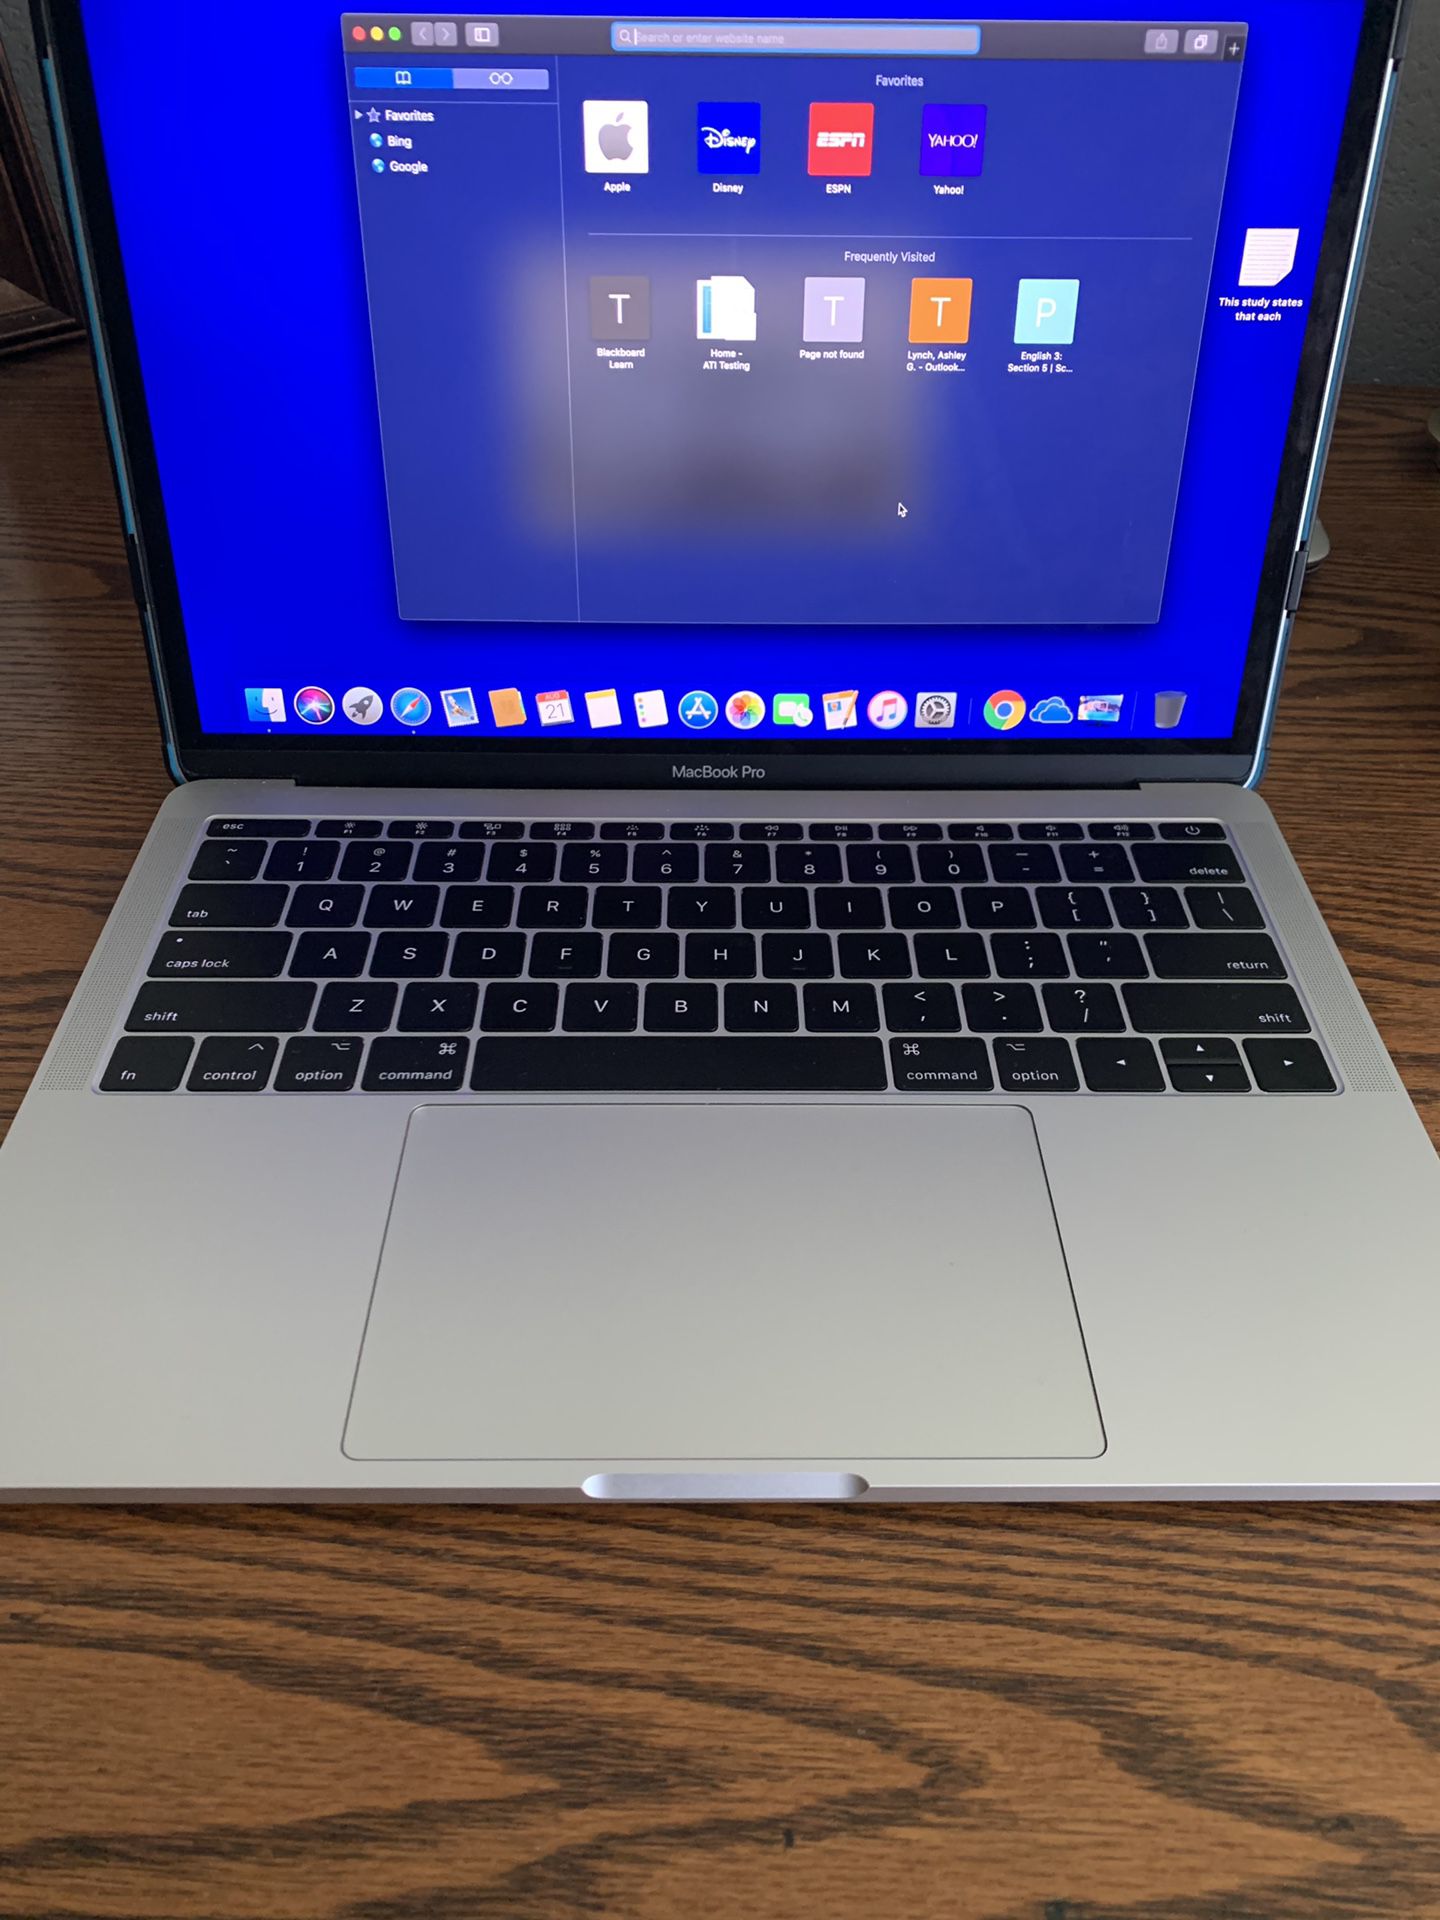 MacBook Pro (13- inch, 2017, two thunderbolt 3 ports)